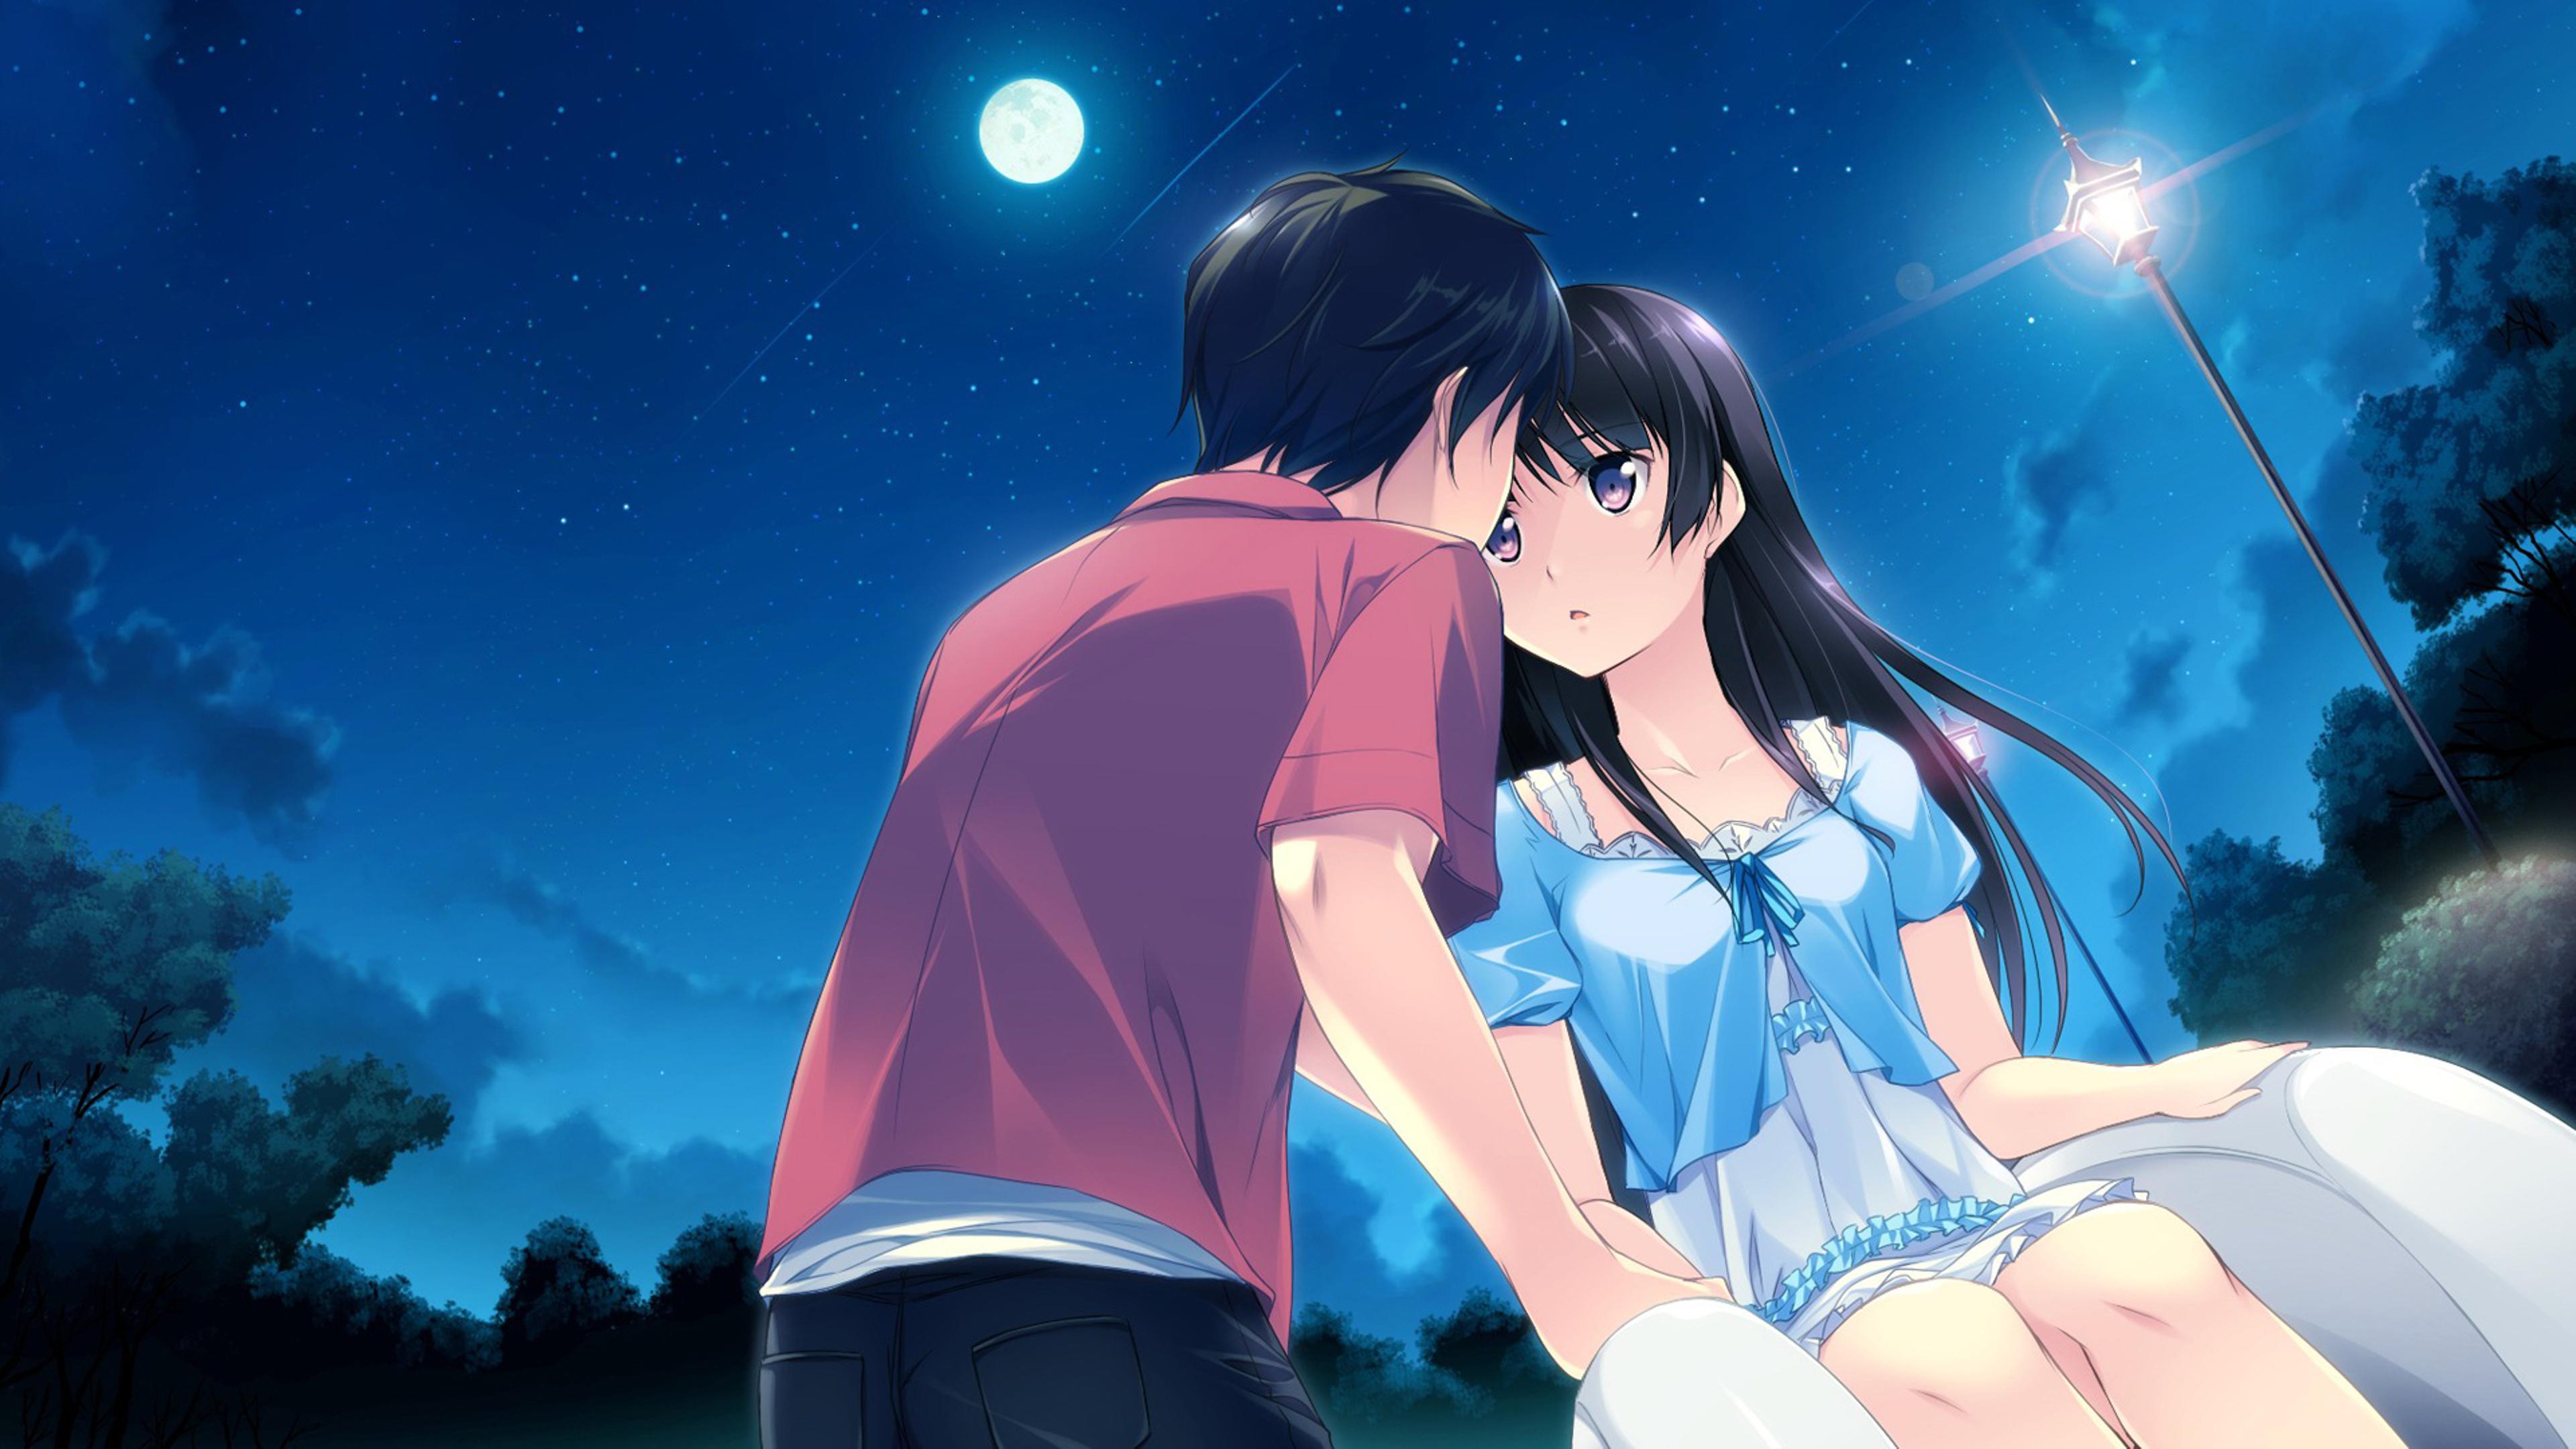 3840 x 2160 · jpeg - Anime couple during the night under the moonlight Wallpaper Download ...